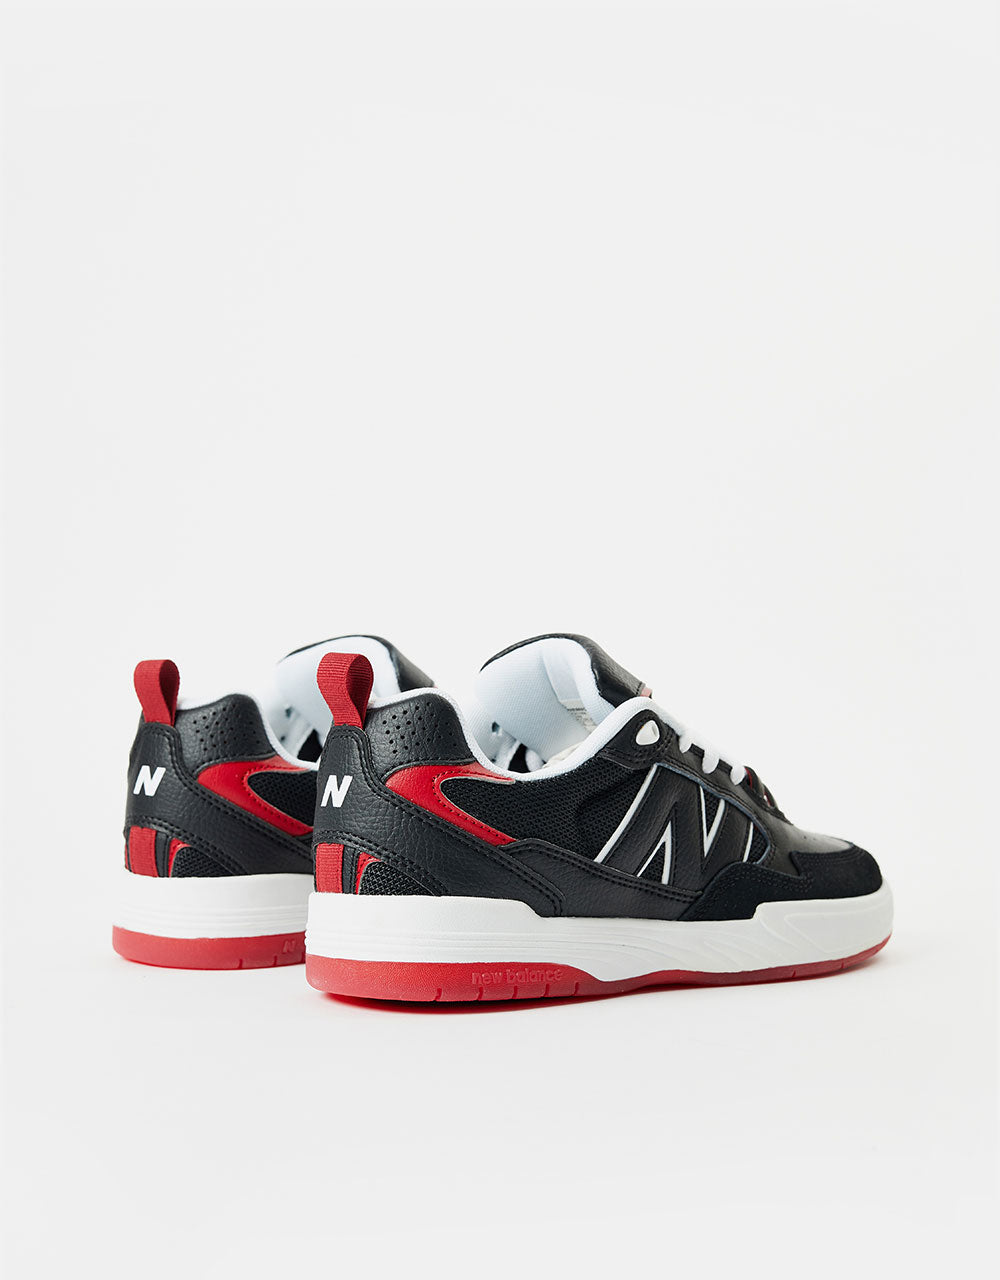 New Balance Numeric 808 Skate Shoes - Black/Red